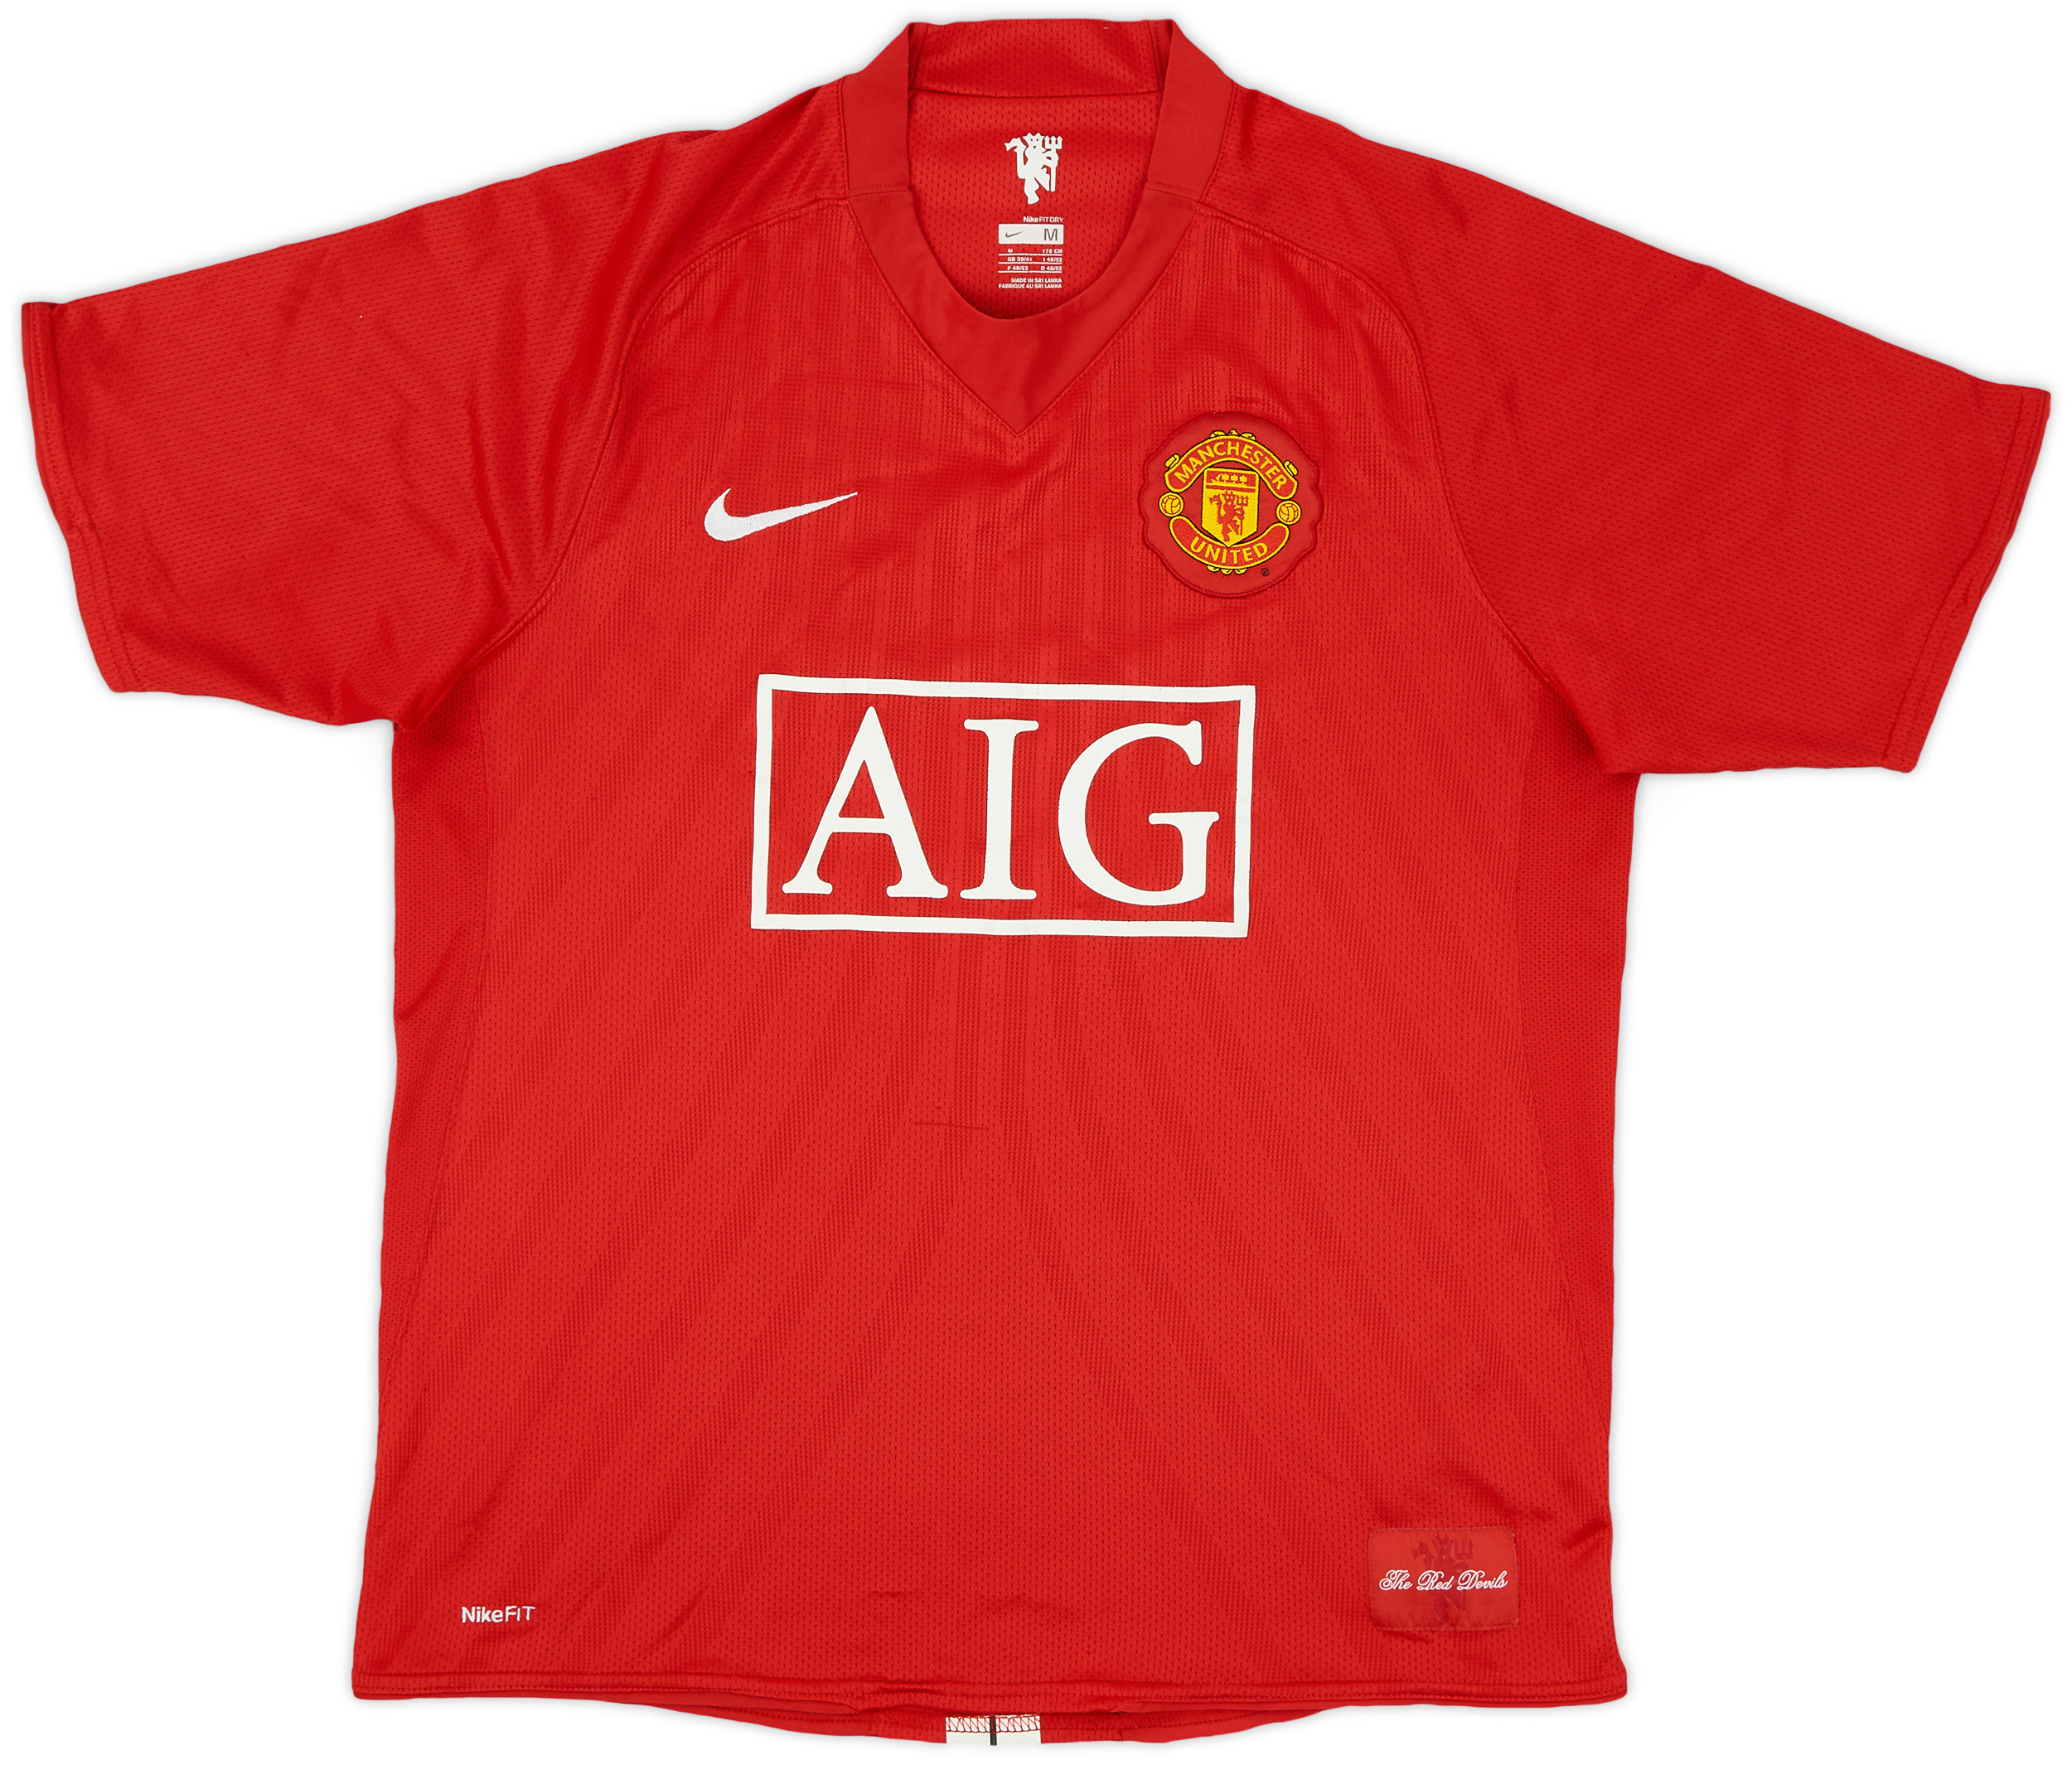 2007-09 Manchester United Home Shirt - 5/10 - (M)